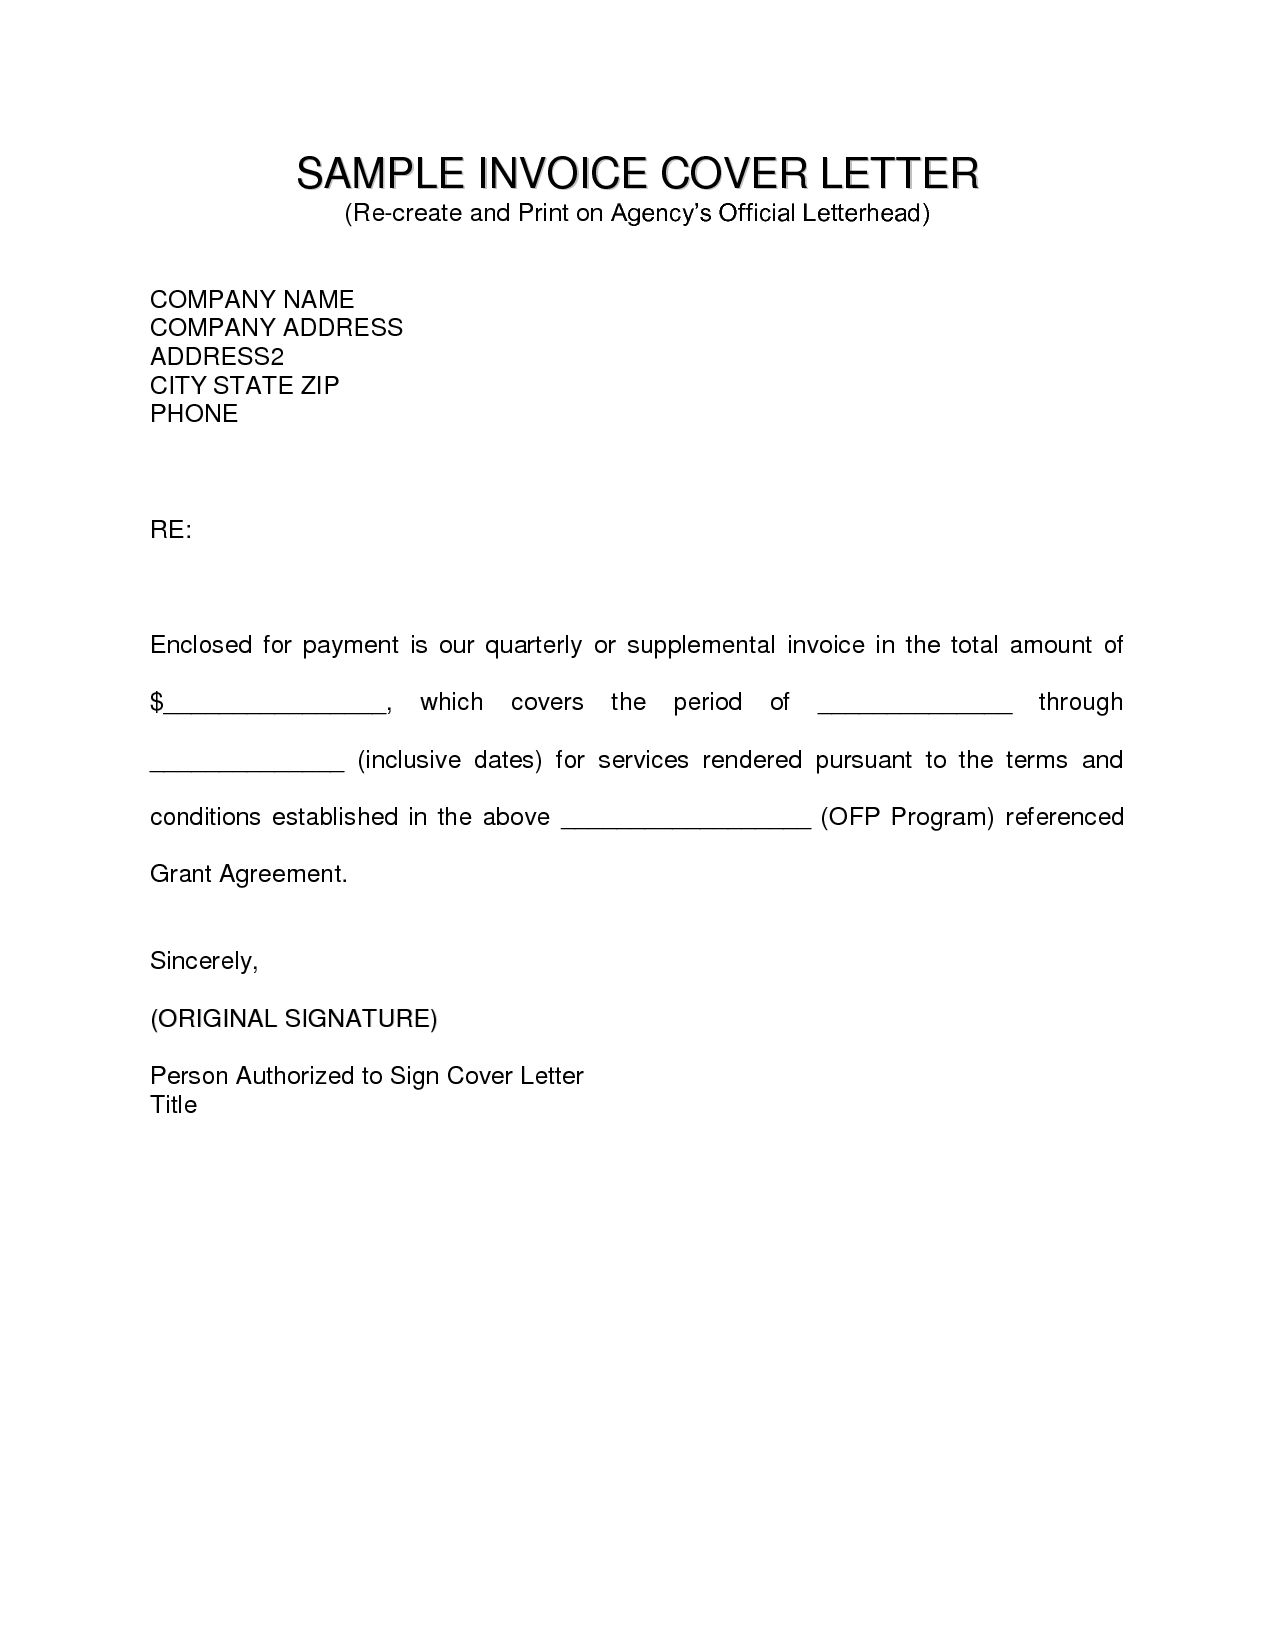 Sample Letter Requesting Payment Invoice